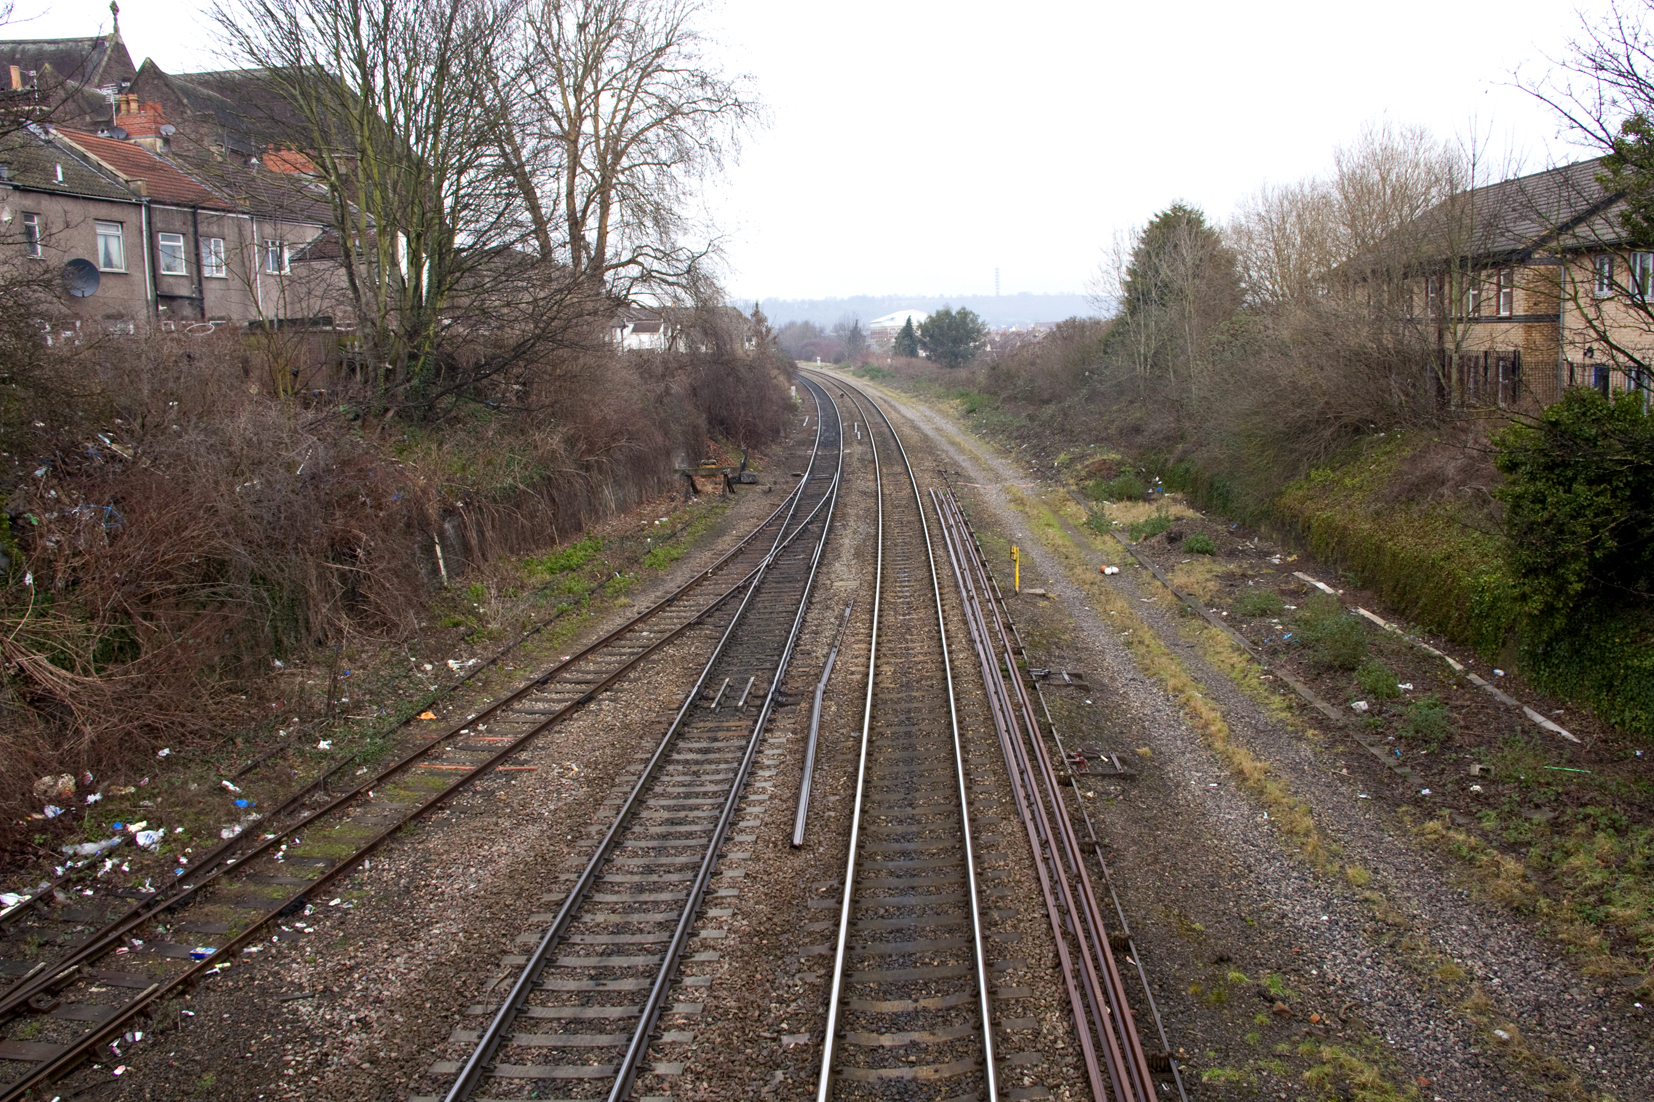 several railway tracks running through a residential area